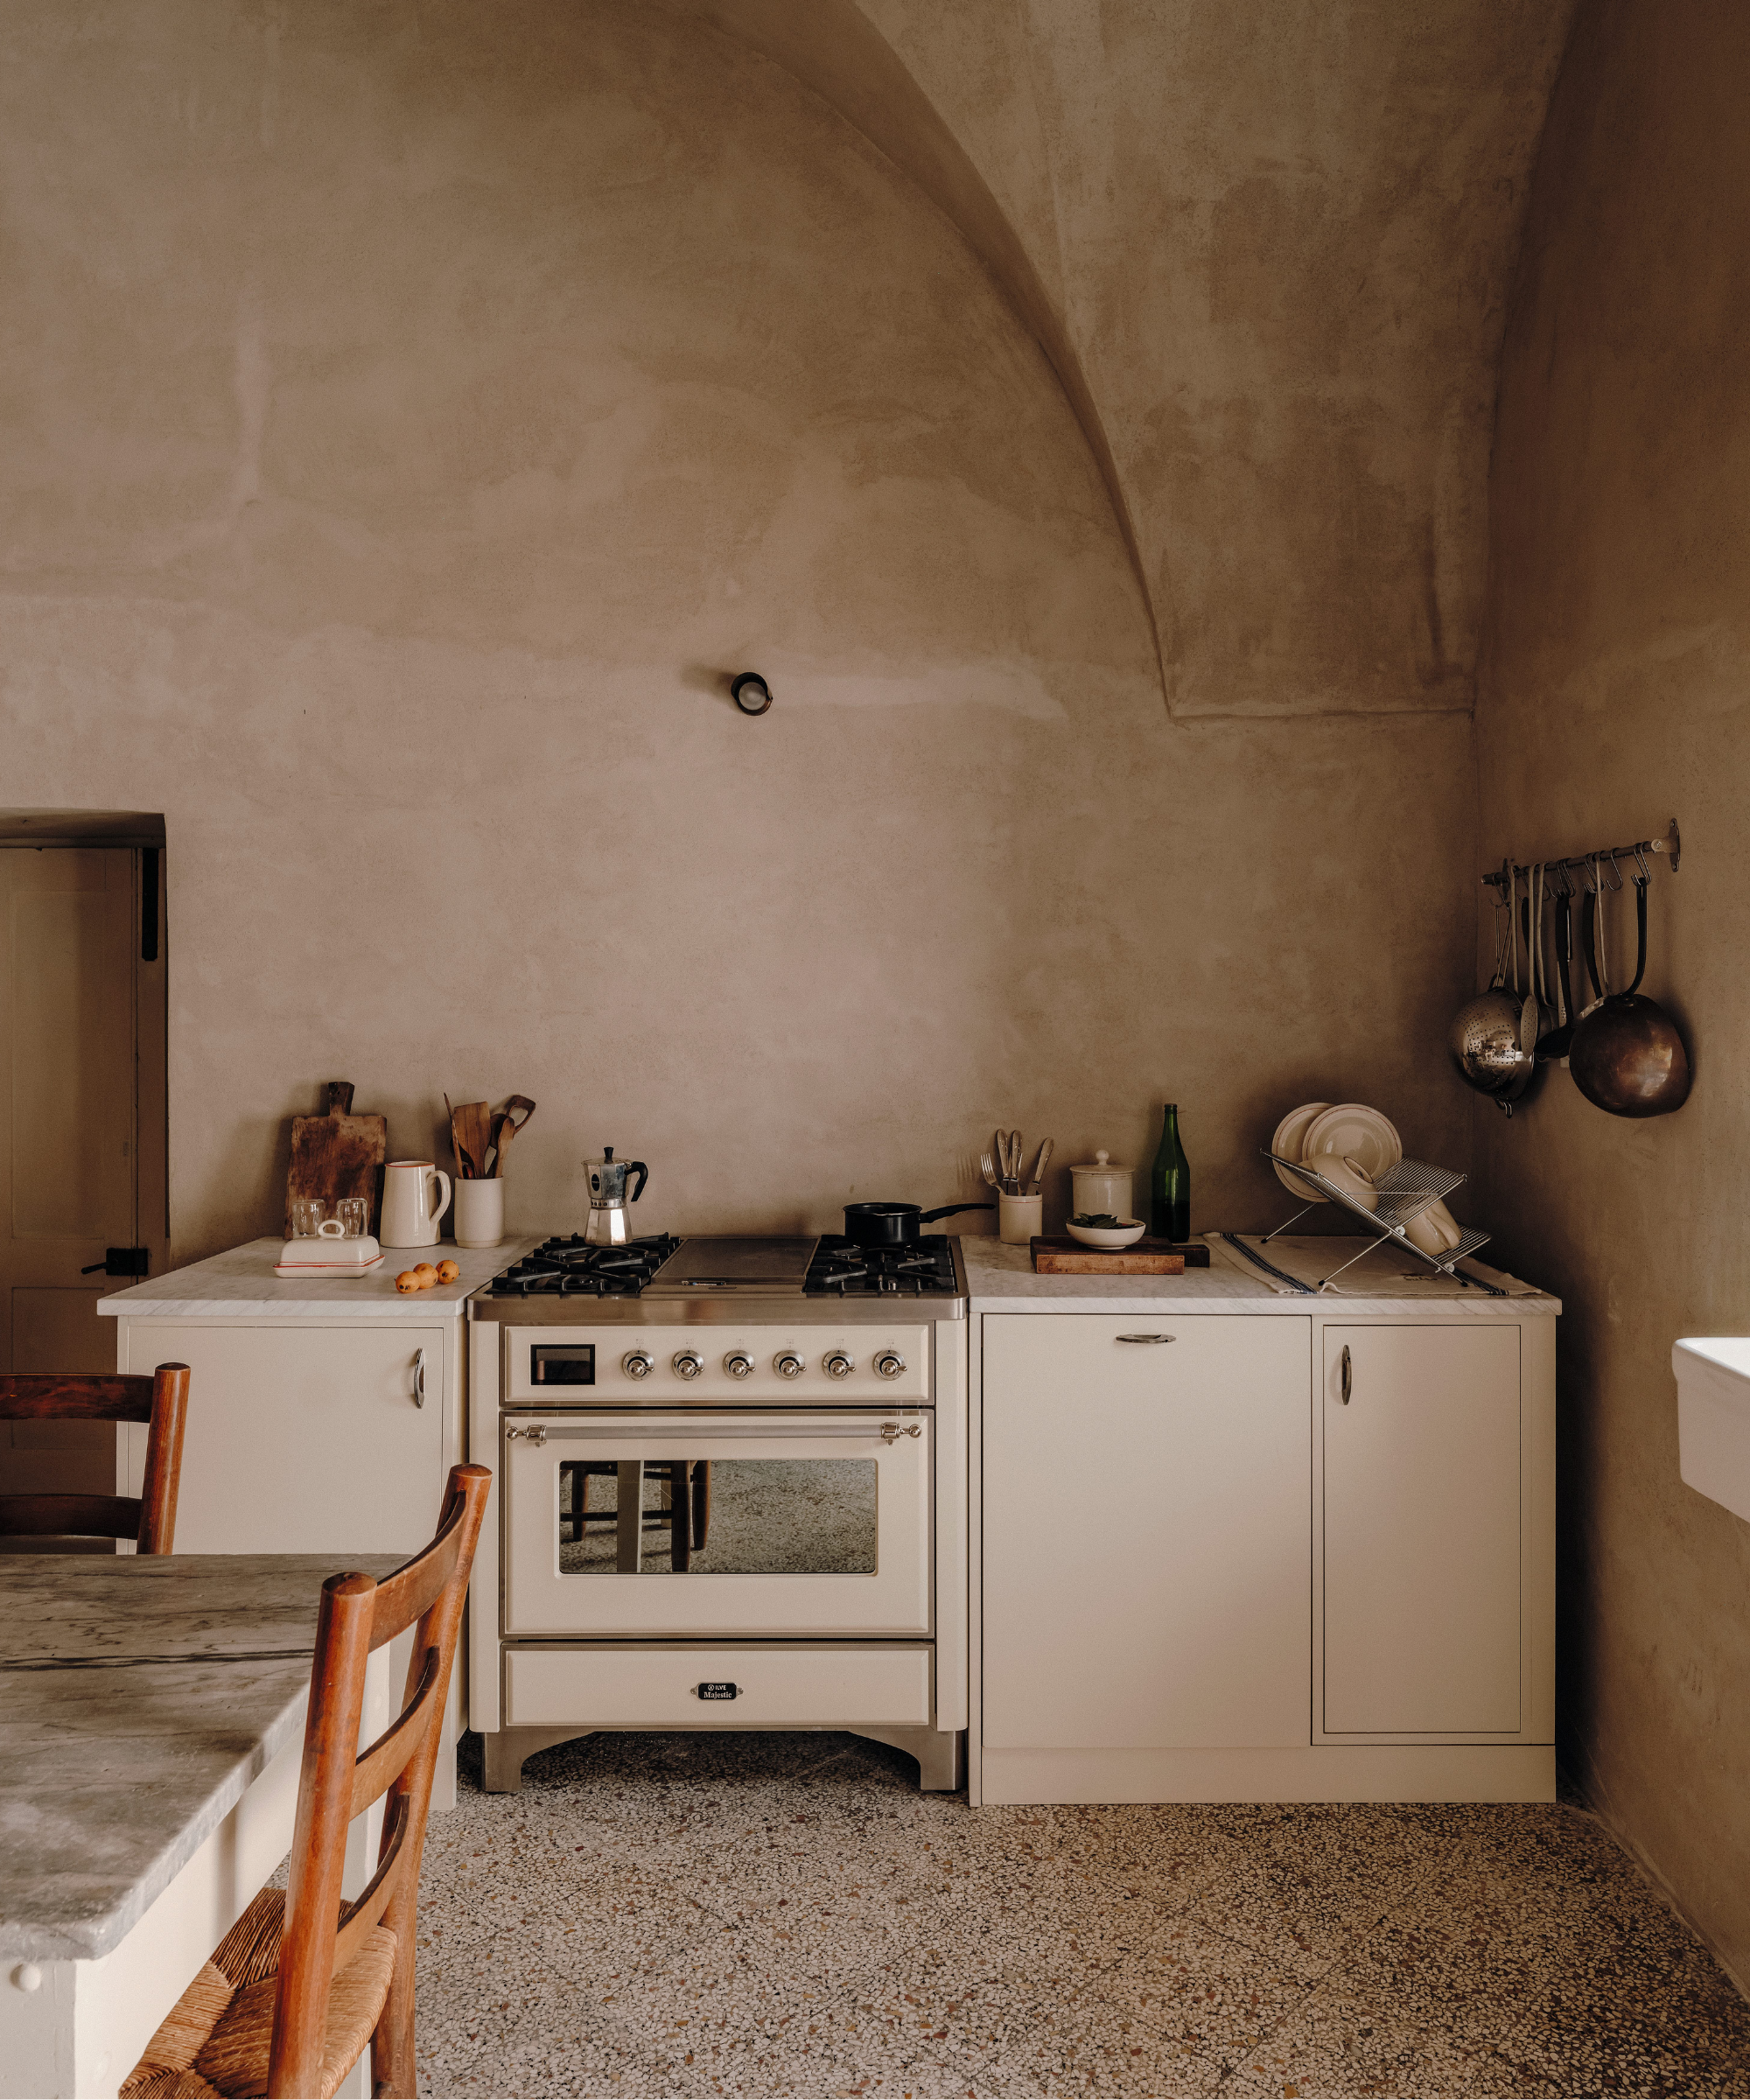 kitchen in puglian house in neutral colors